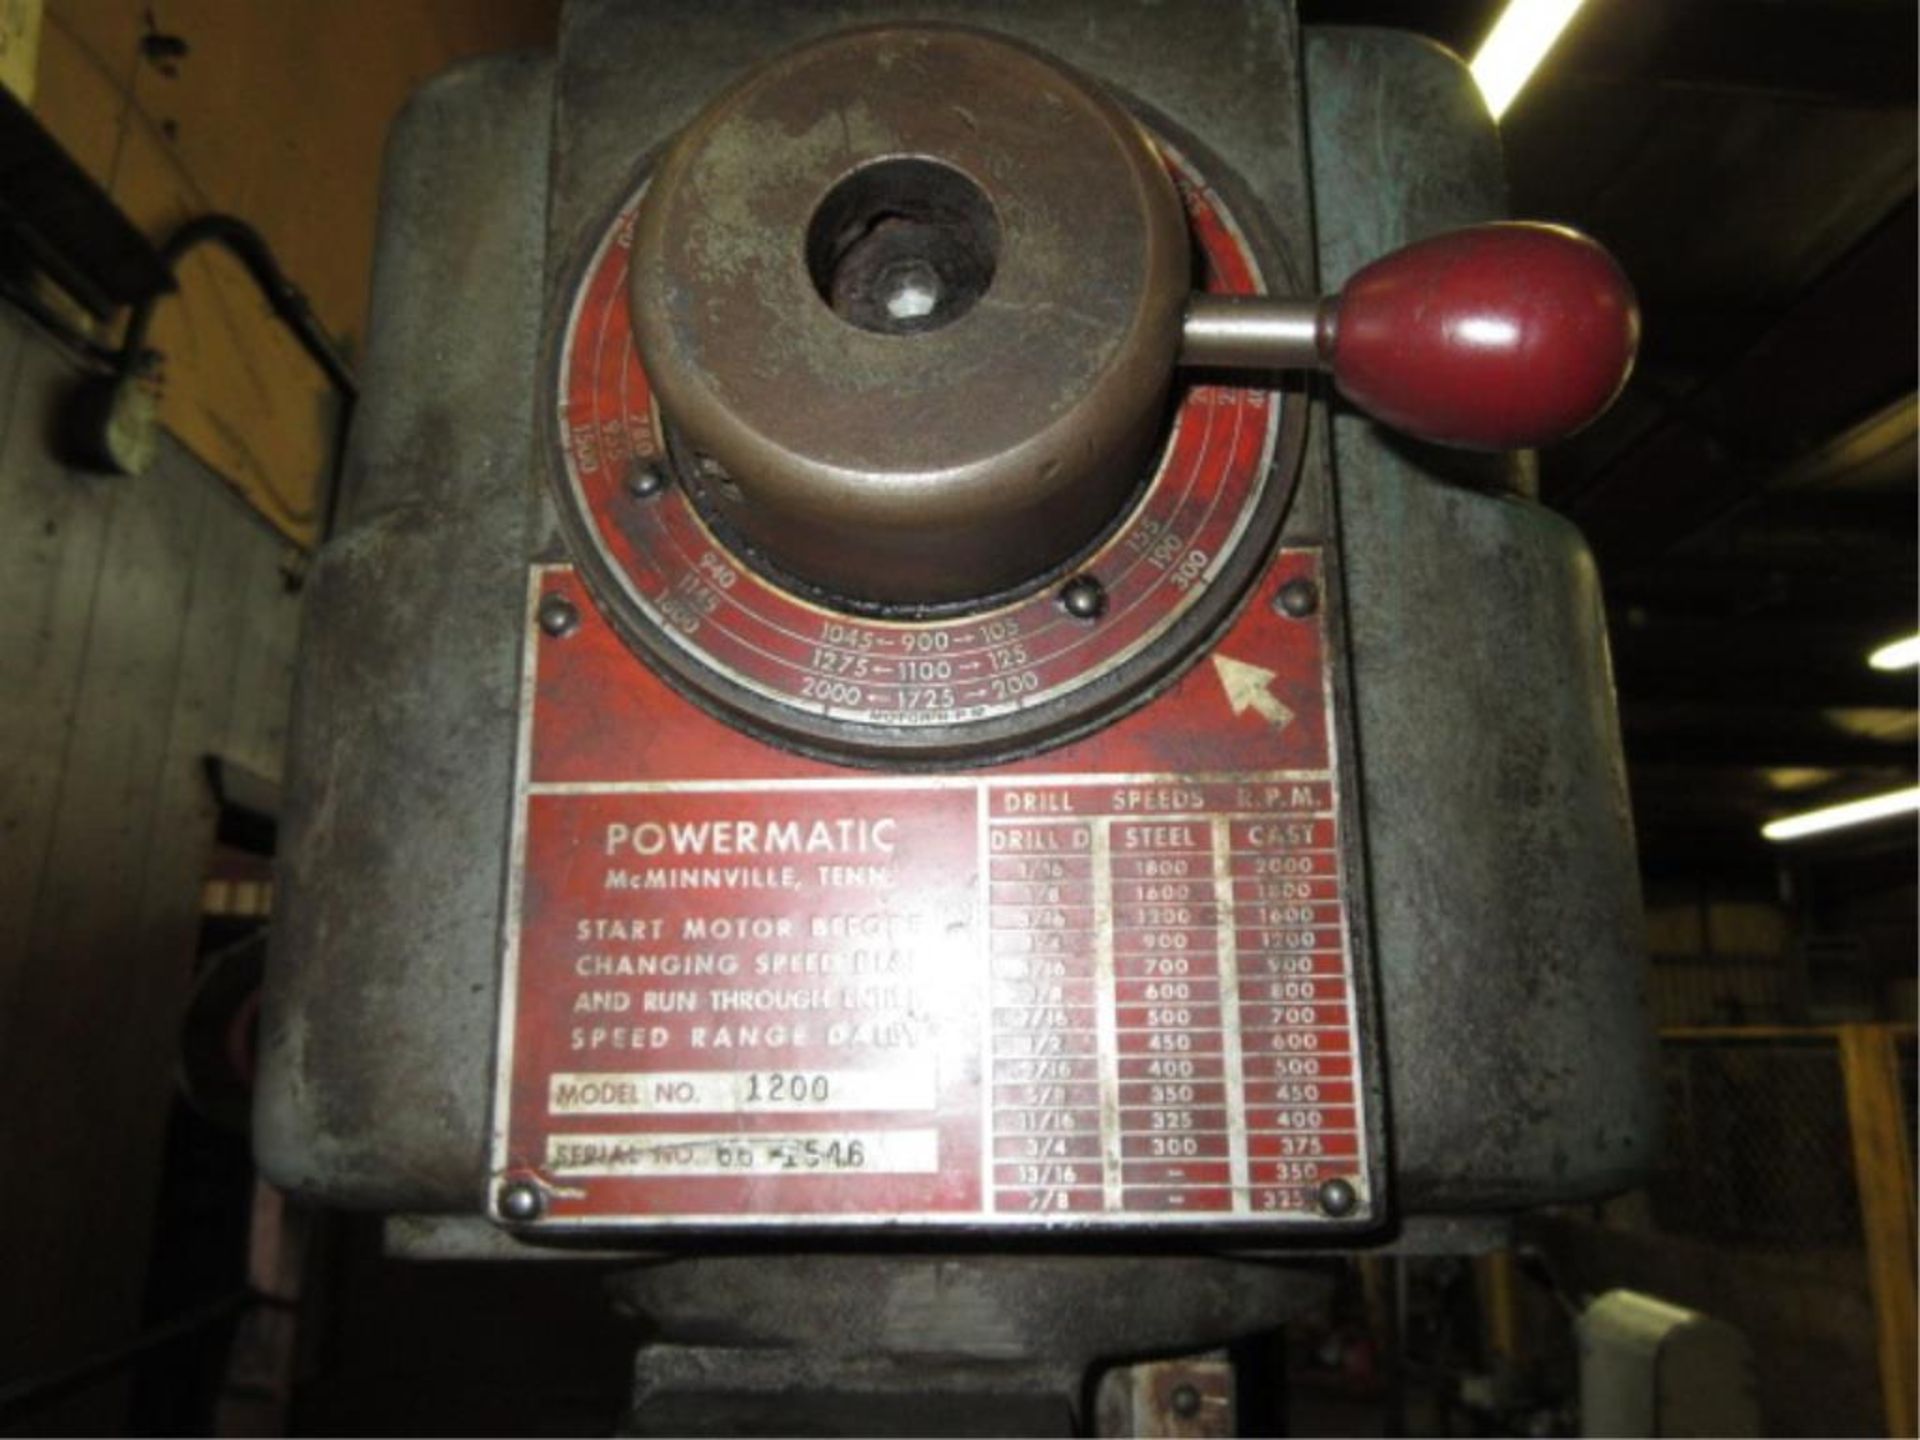 Powermatic Drill Press. Powermatic 1200 20" Variable Speed Drilling/Tapping Machine, 1-hp, spindle - Image 4 of 5